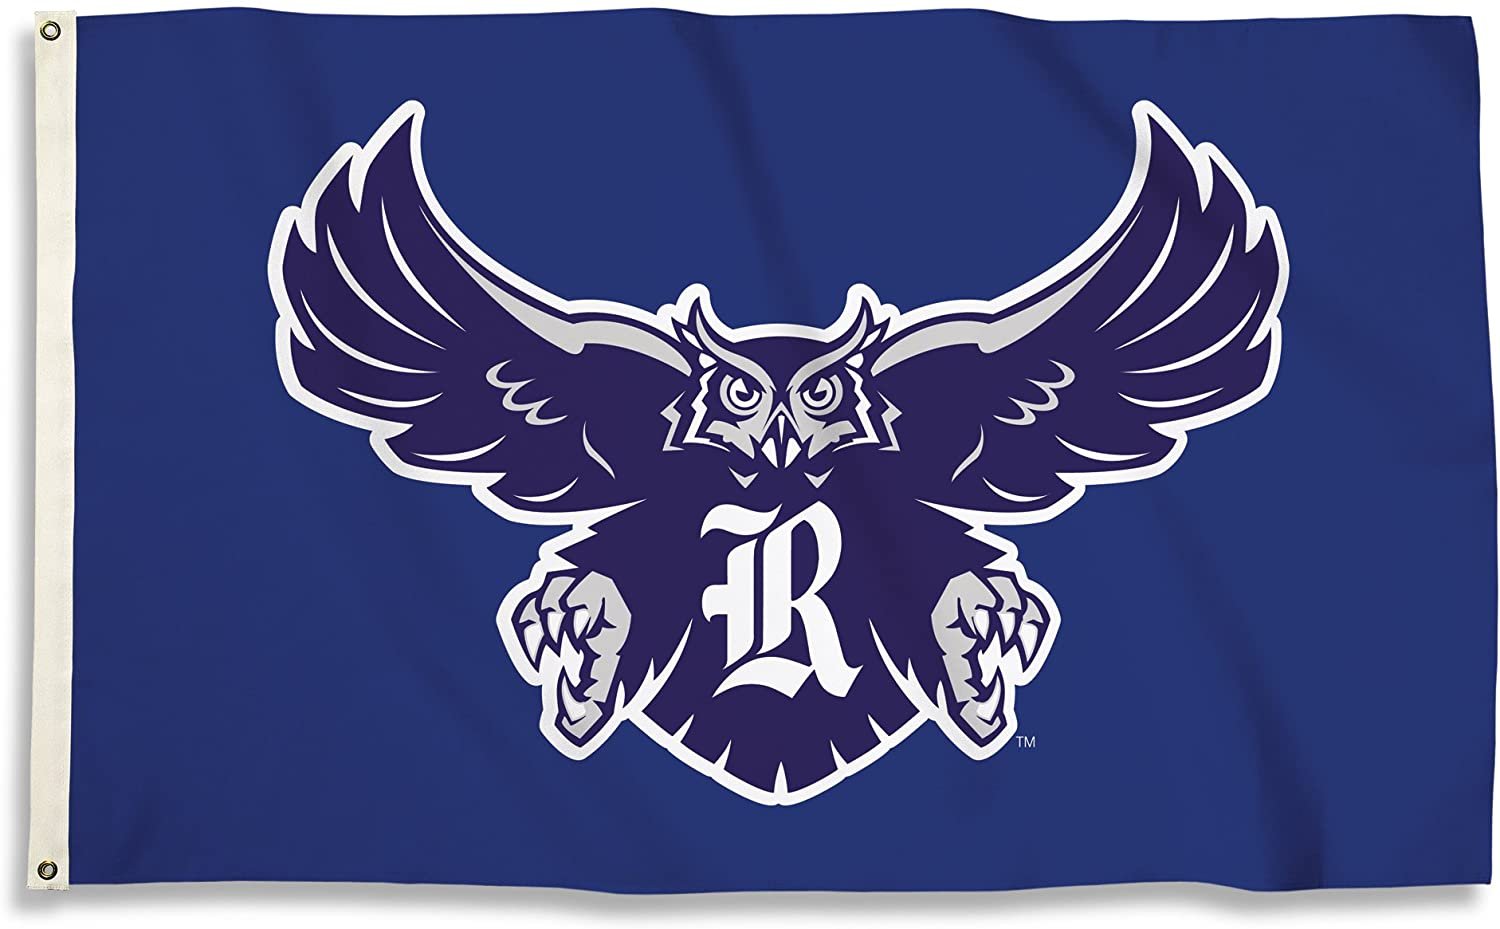 Rice University Owls Premium 3x5 Feet Flag Banner, Metal Grommets, Outdoor Indoor Use, Single Sided